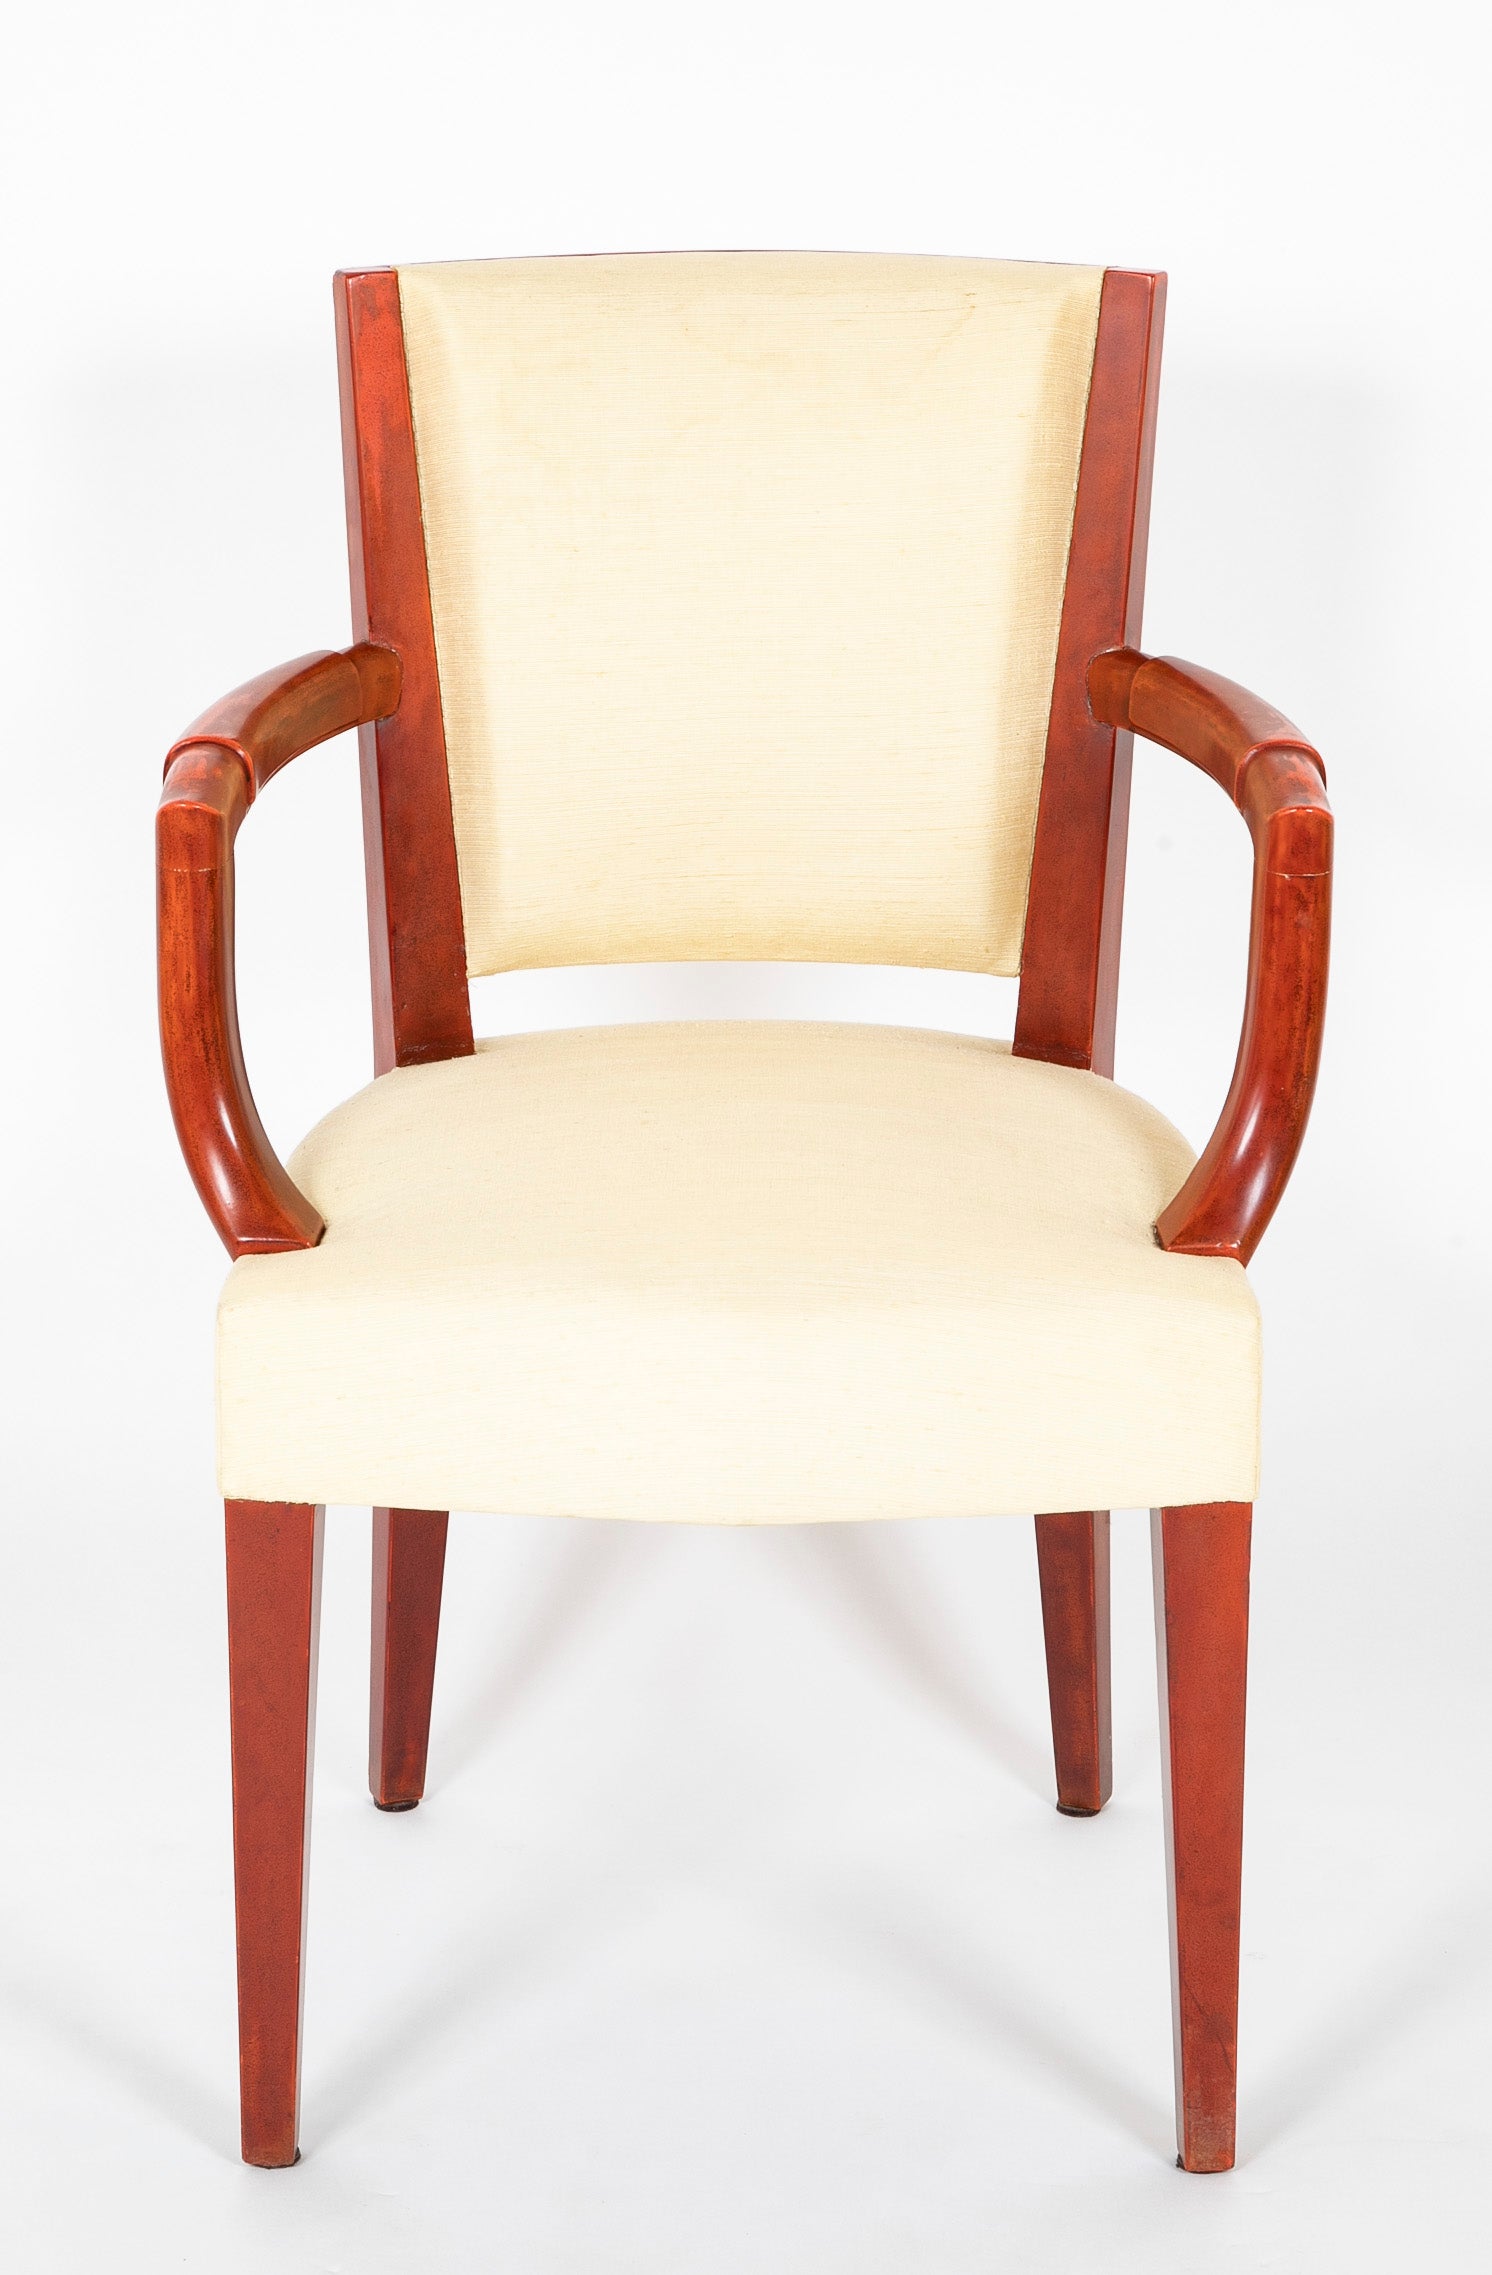 Set of 4 Red Lacquered Dining Chairs by Eugene Printz